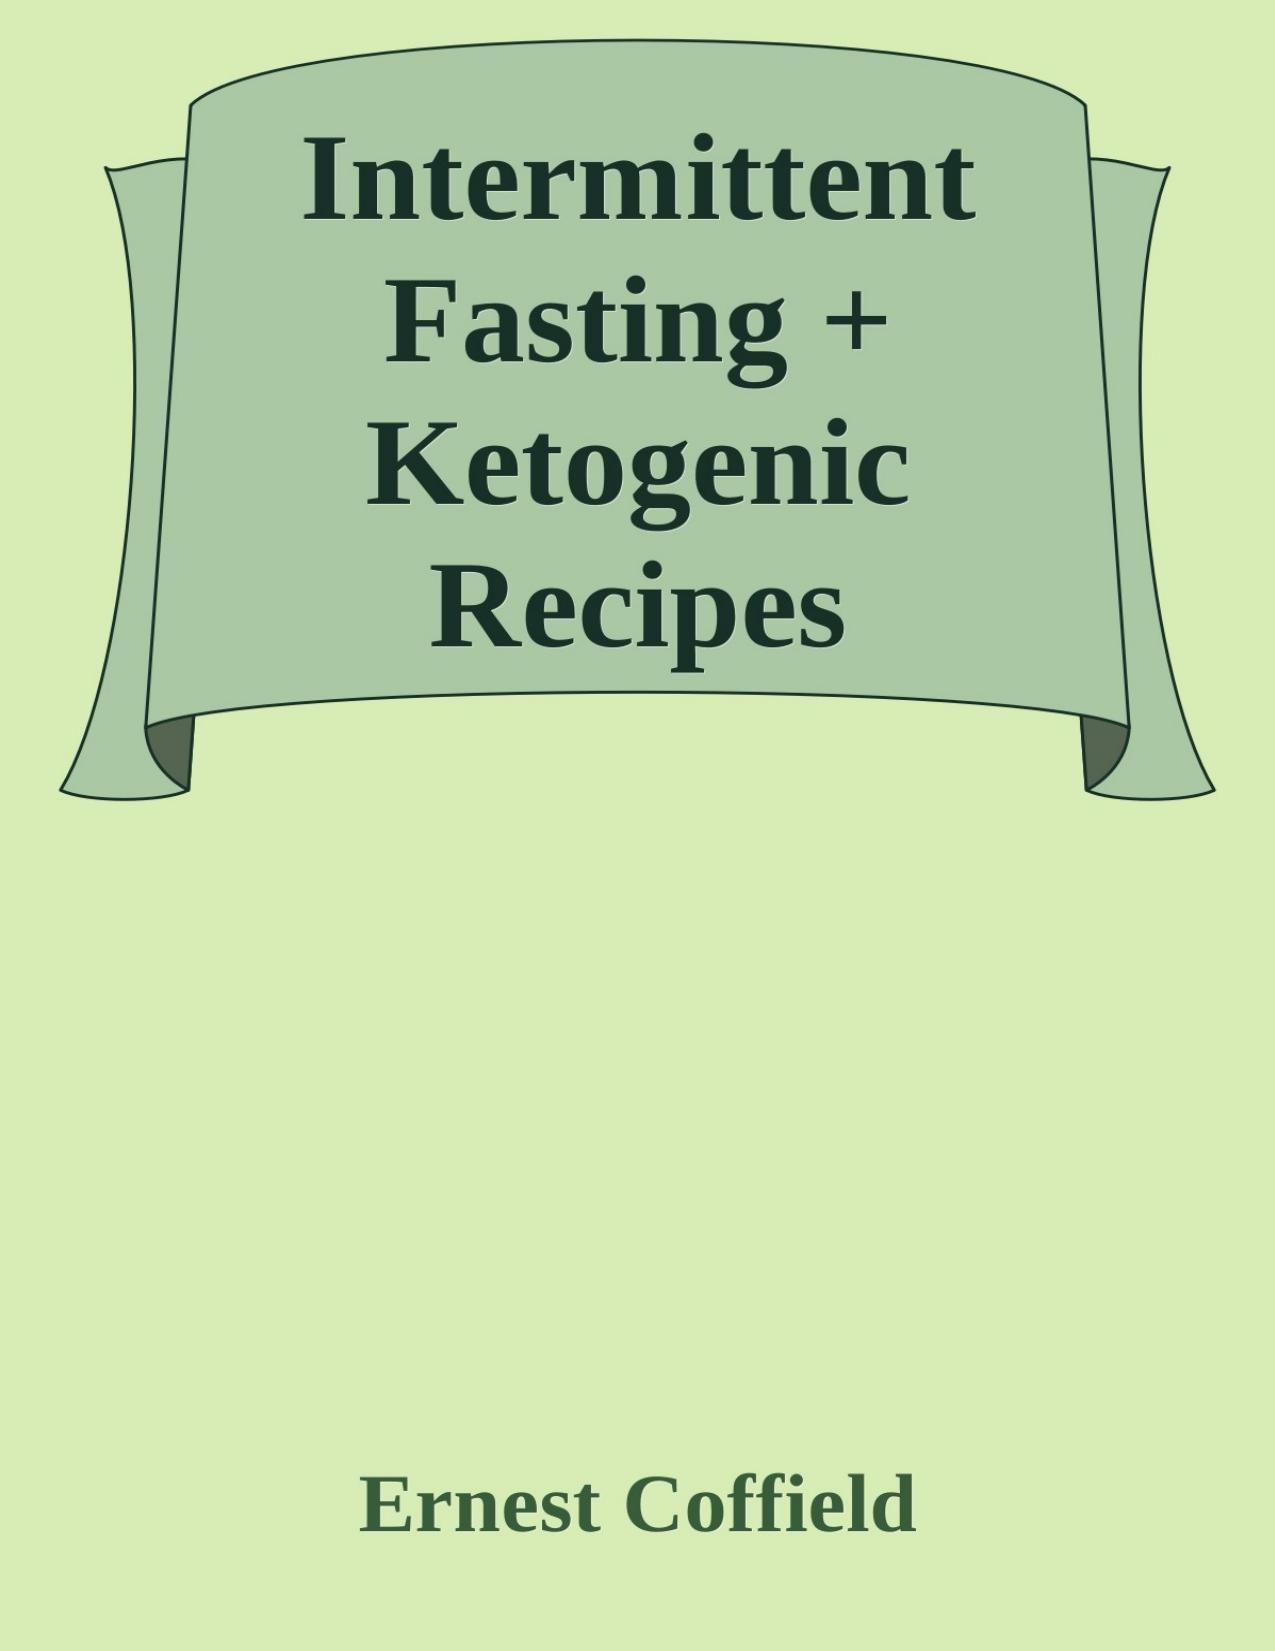 Intermittent Fasting + Ketogenic Recipes CookBook: A 60-Day Ultimate Guide to Intermittent Fasting, Healthy Lifestyle \& Easy Weight Loss - PDFDrive.com